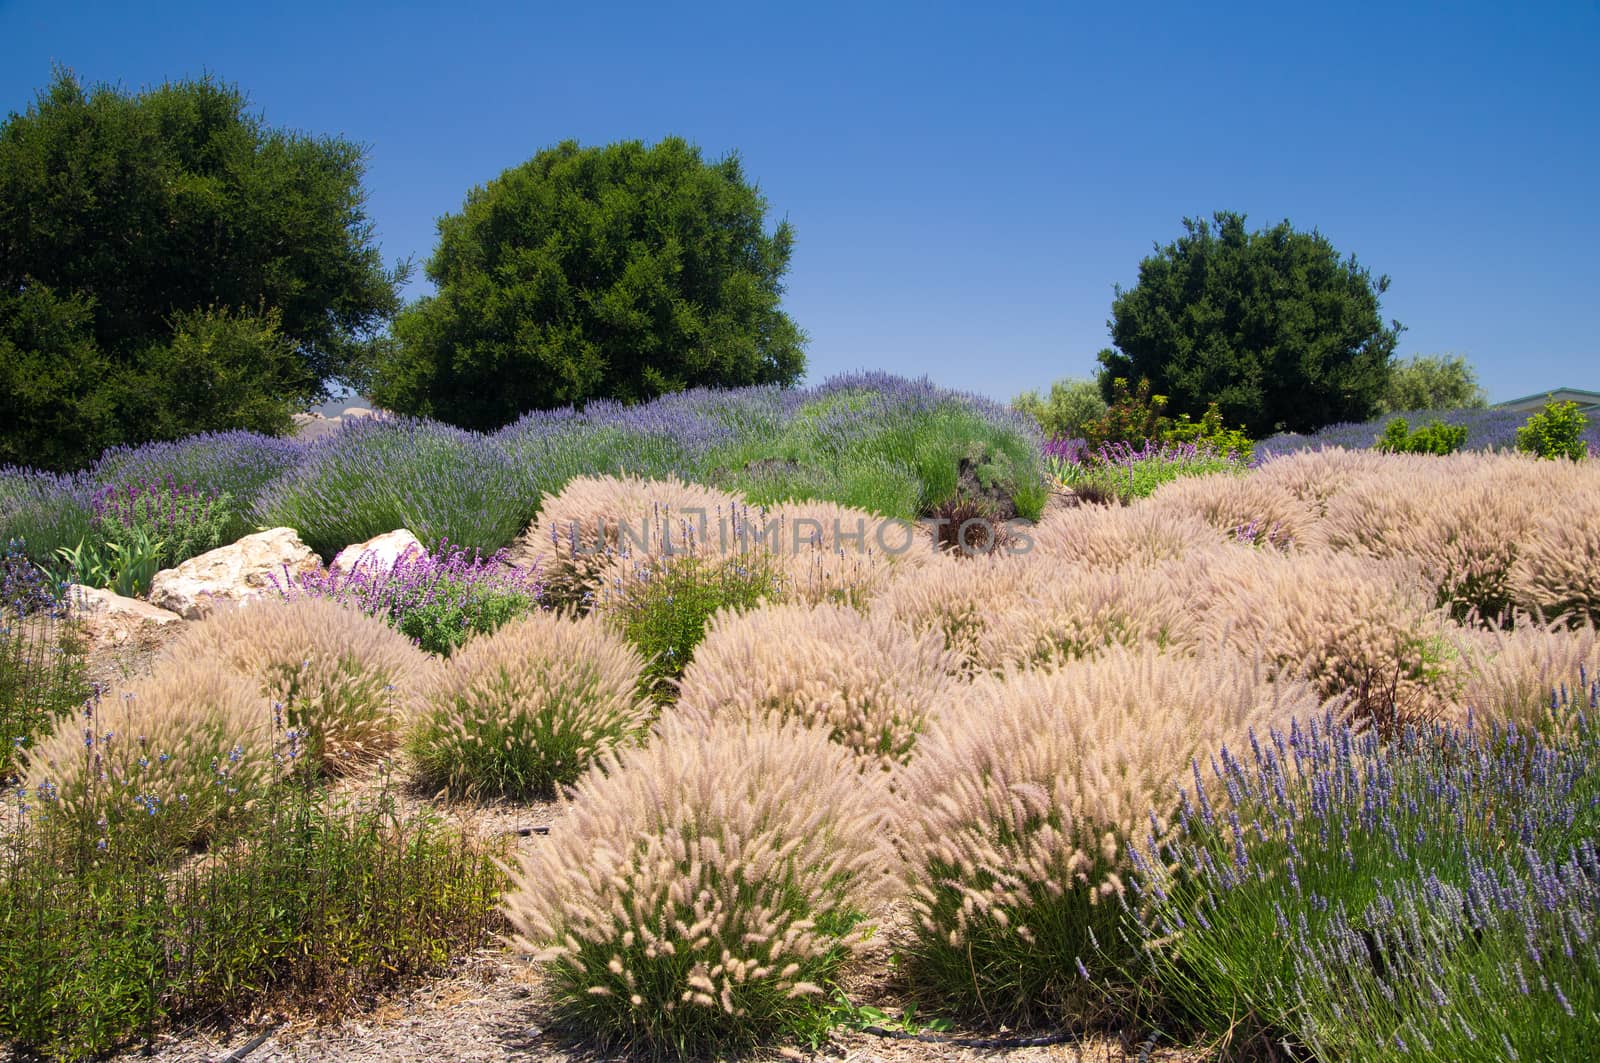 Soft grasses of California in Summer by emattil